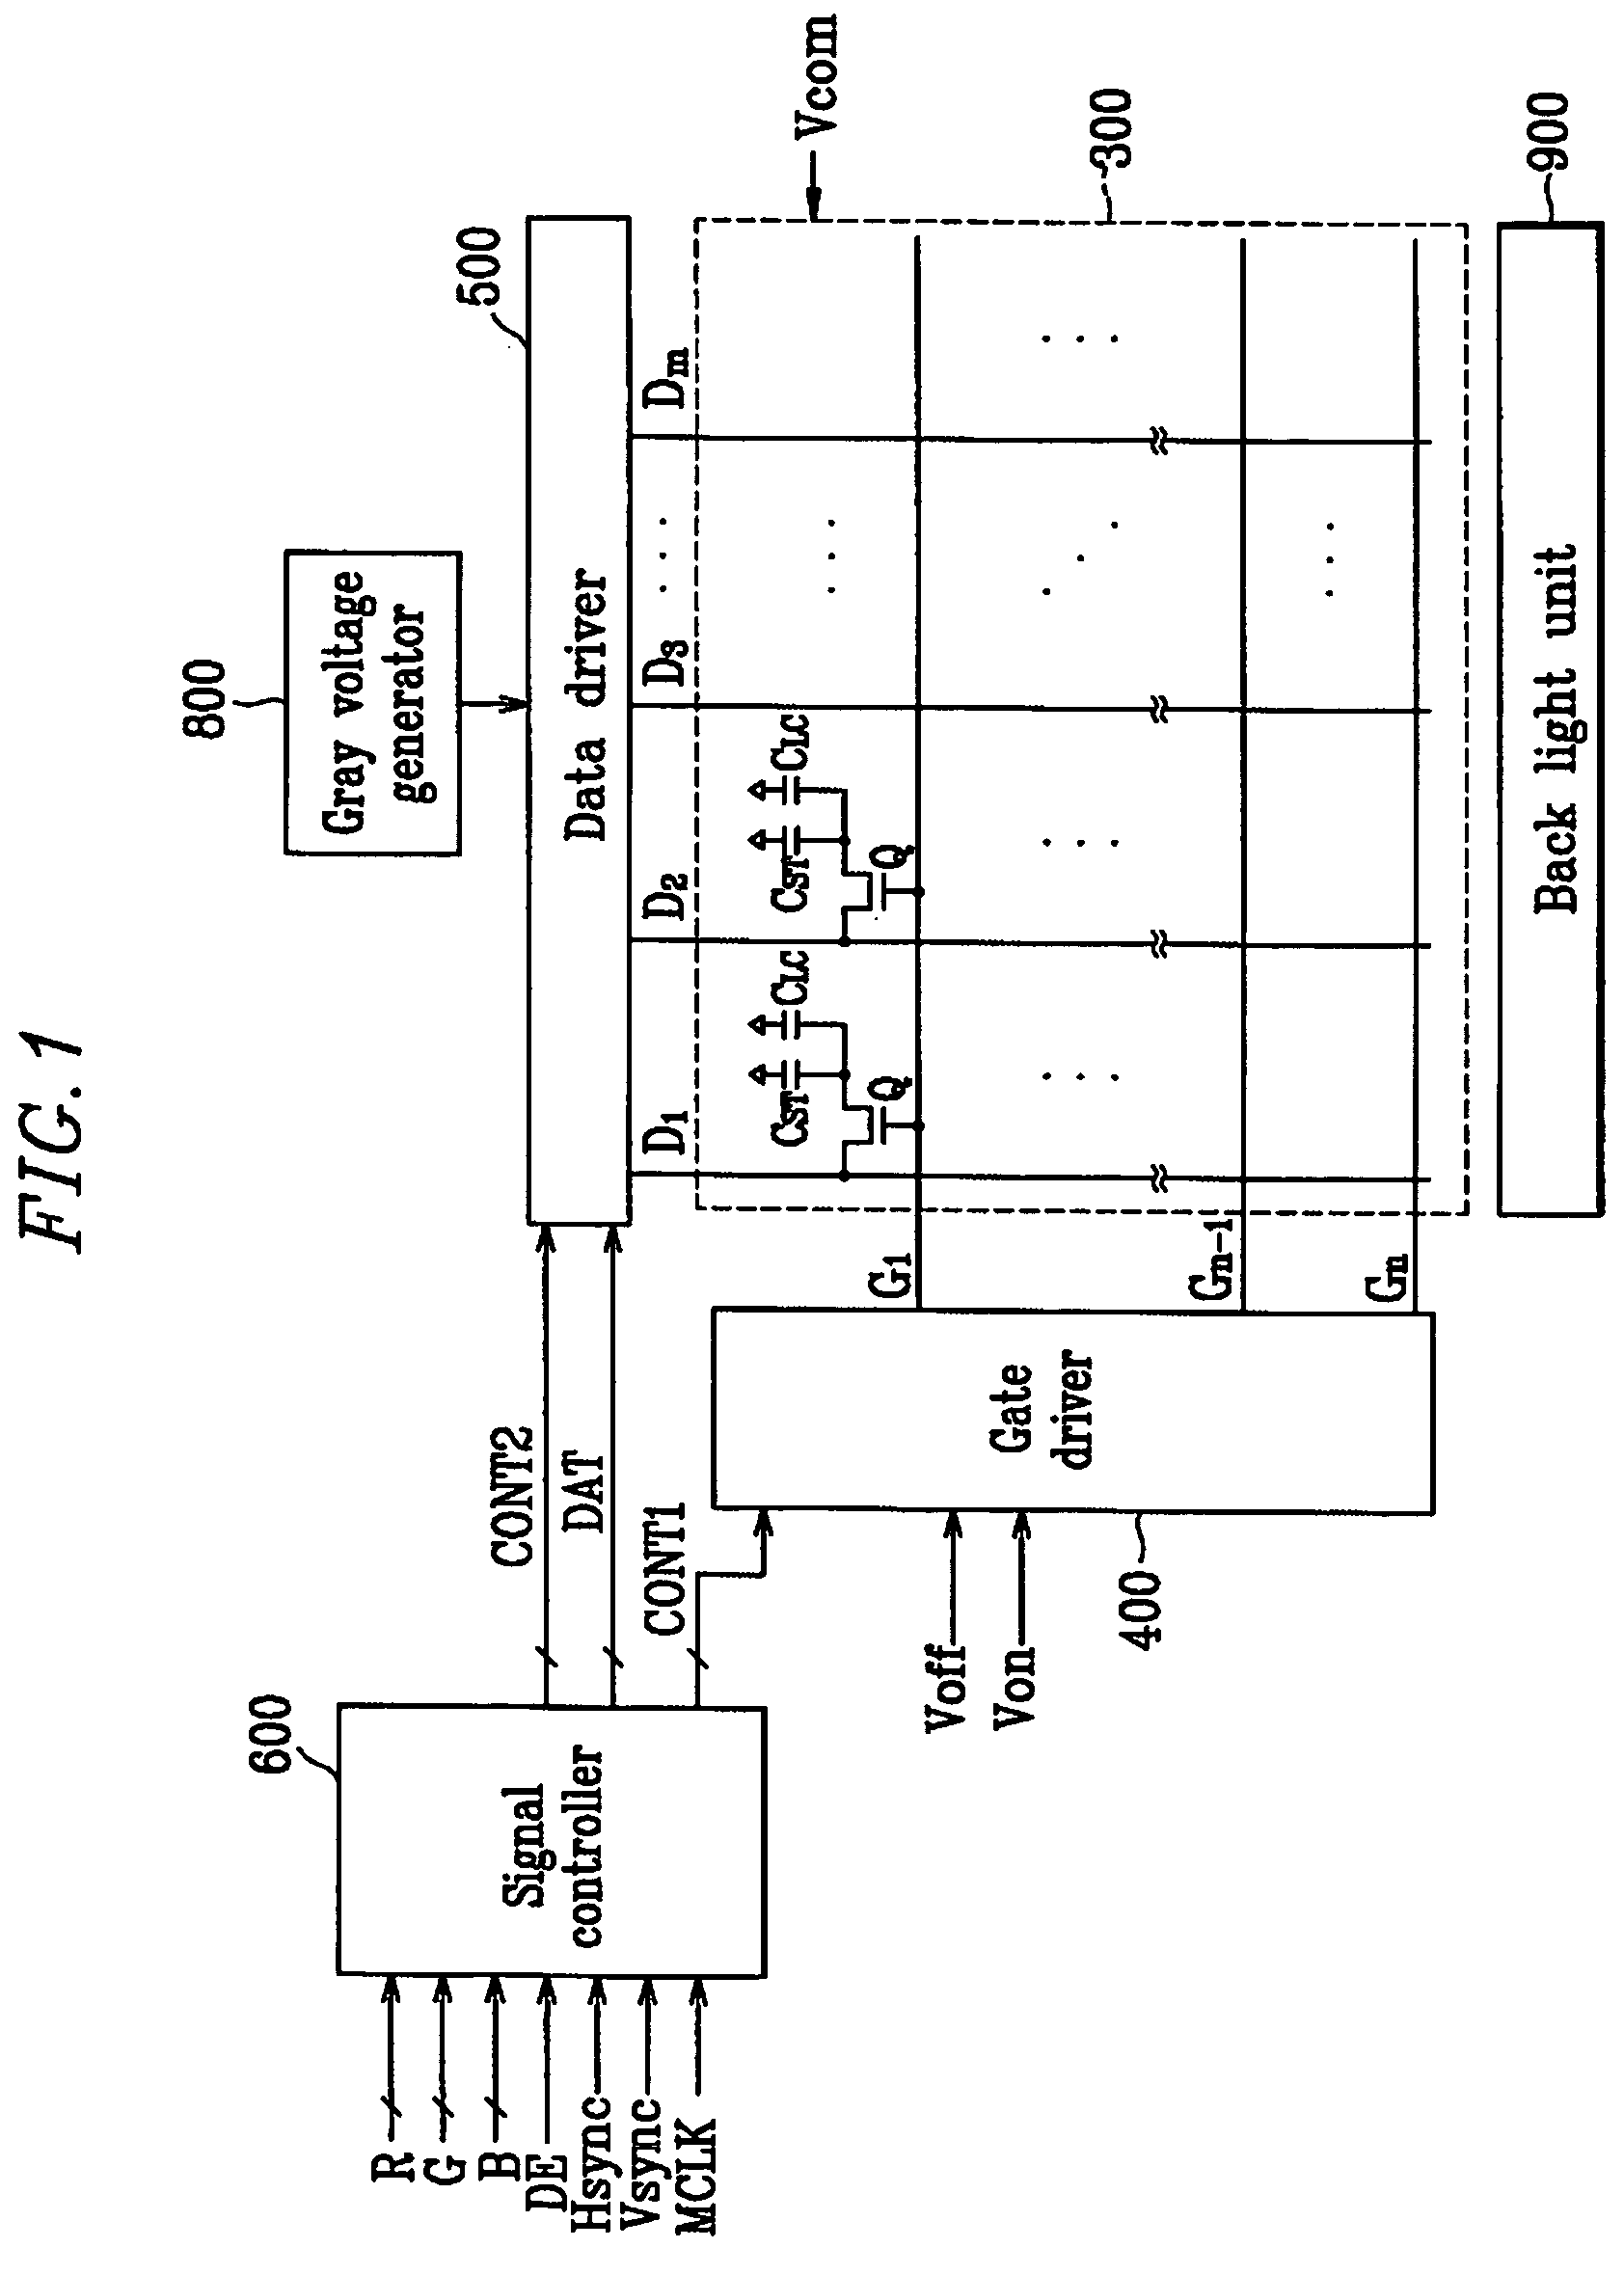 Four-color liquid crystal display with various reflective and transmissive areas